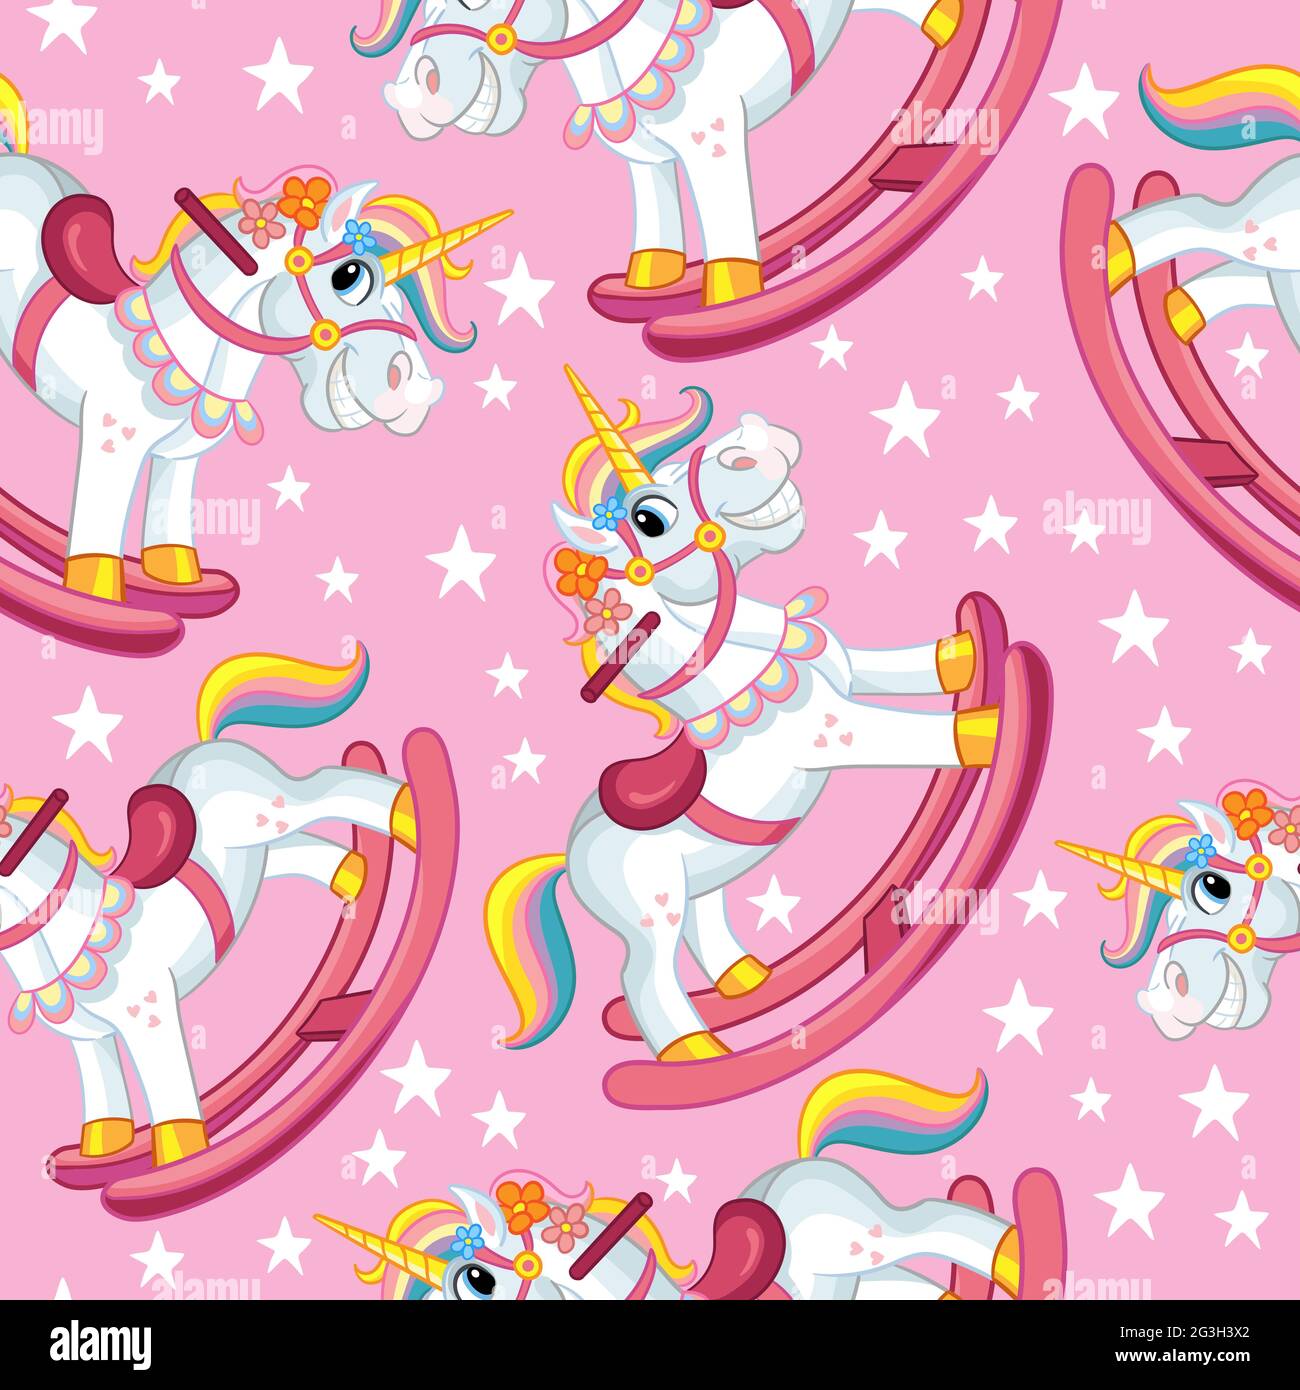 Free download Cartoon cute rocking horse unicorn and stars Vector seamless  [1300x1390] for your Desktop, Mobile & Tablet | Explore 25+ Cute Cartoon  Unicorn Desktop Wallpapers | Cute Cartoon Wallpaper, Cute Cartoon